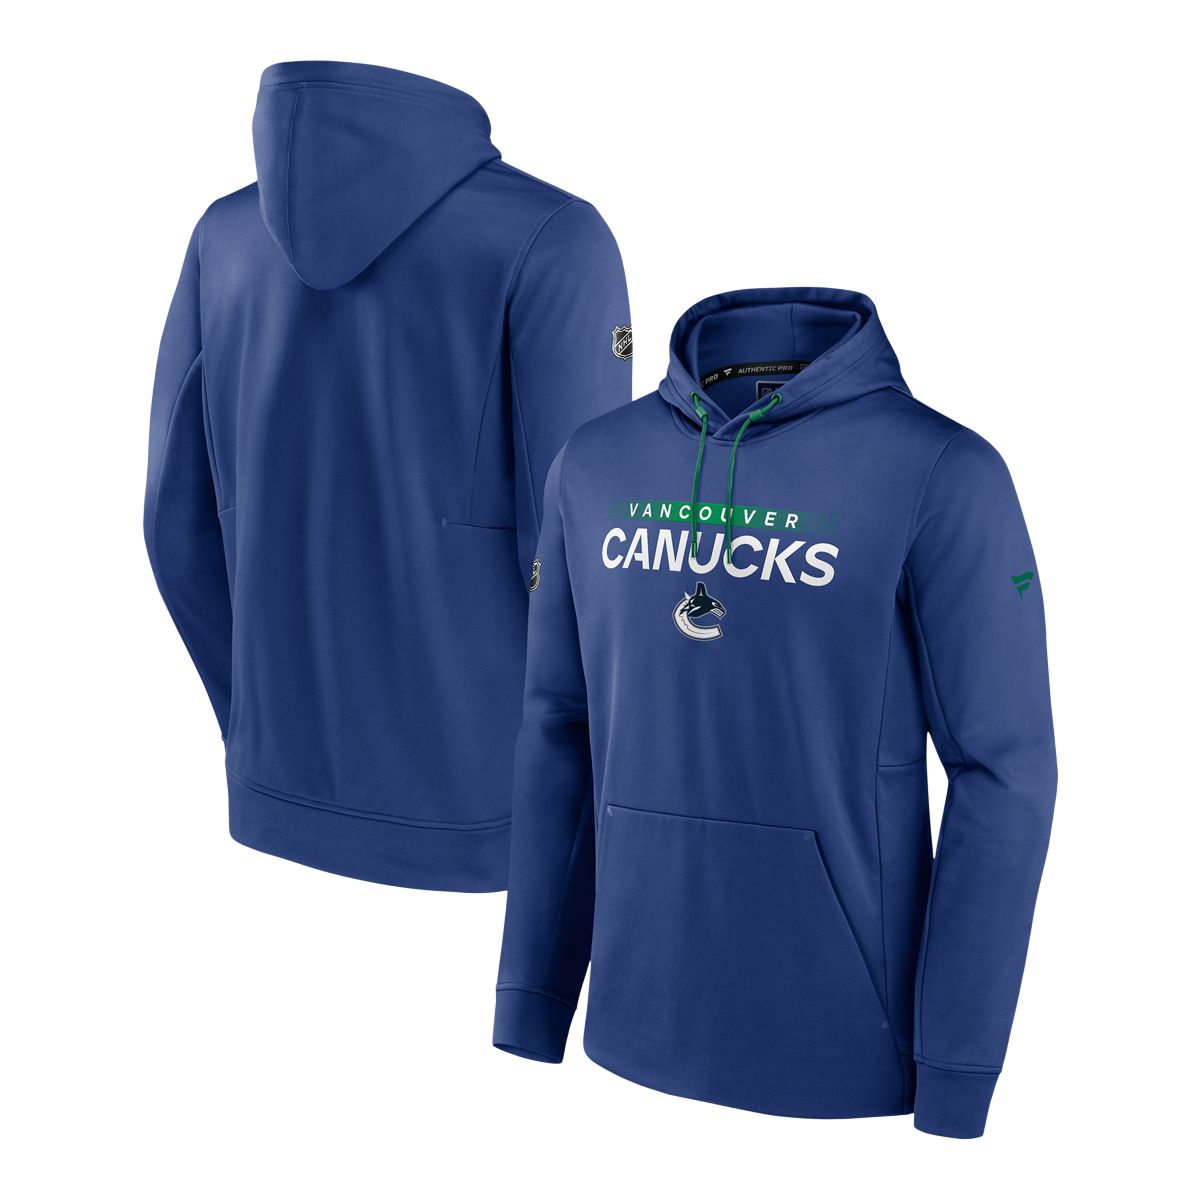 Image of Vancouver Canucks Fanatics Authentic Pro Rink Performance Hoodie